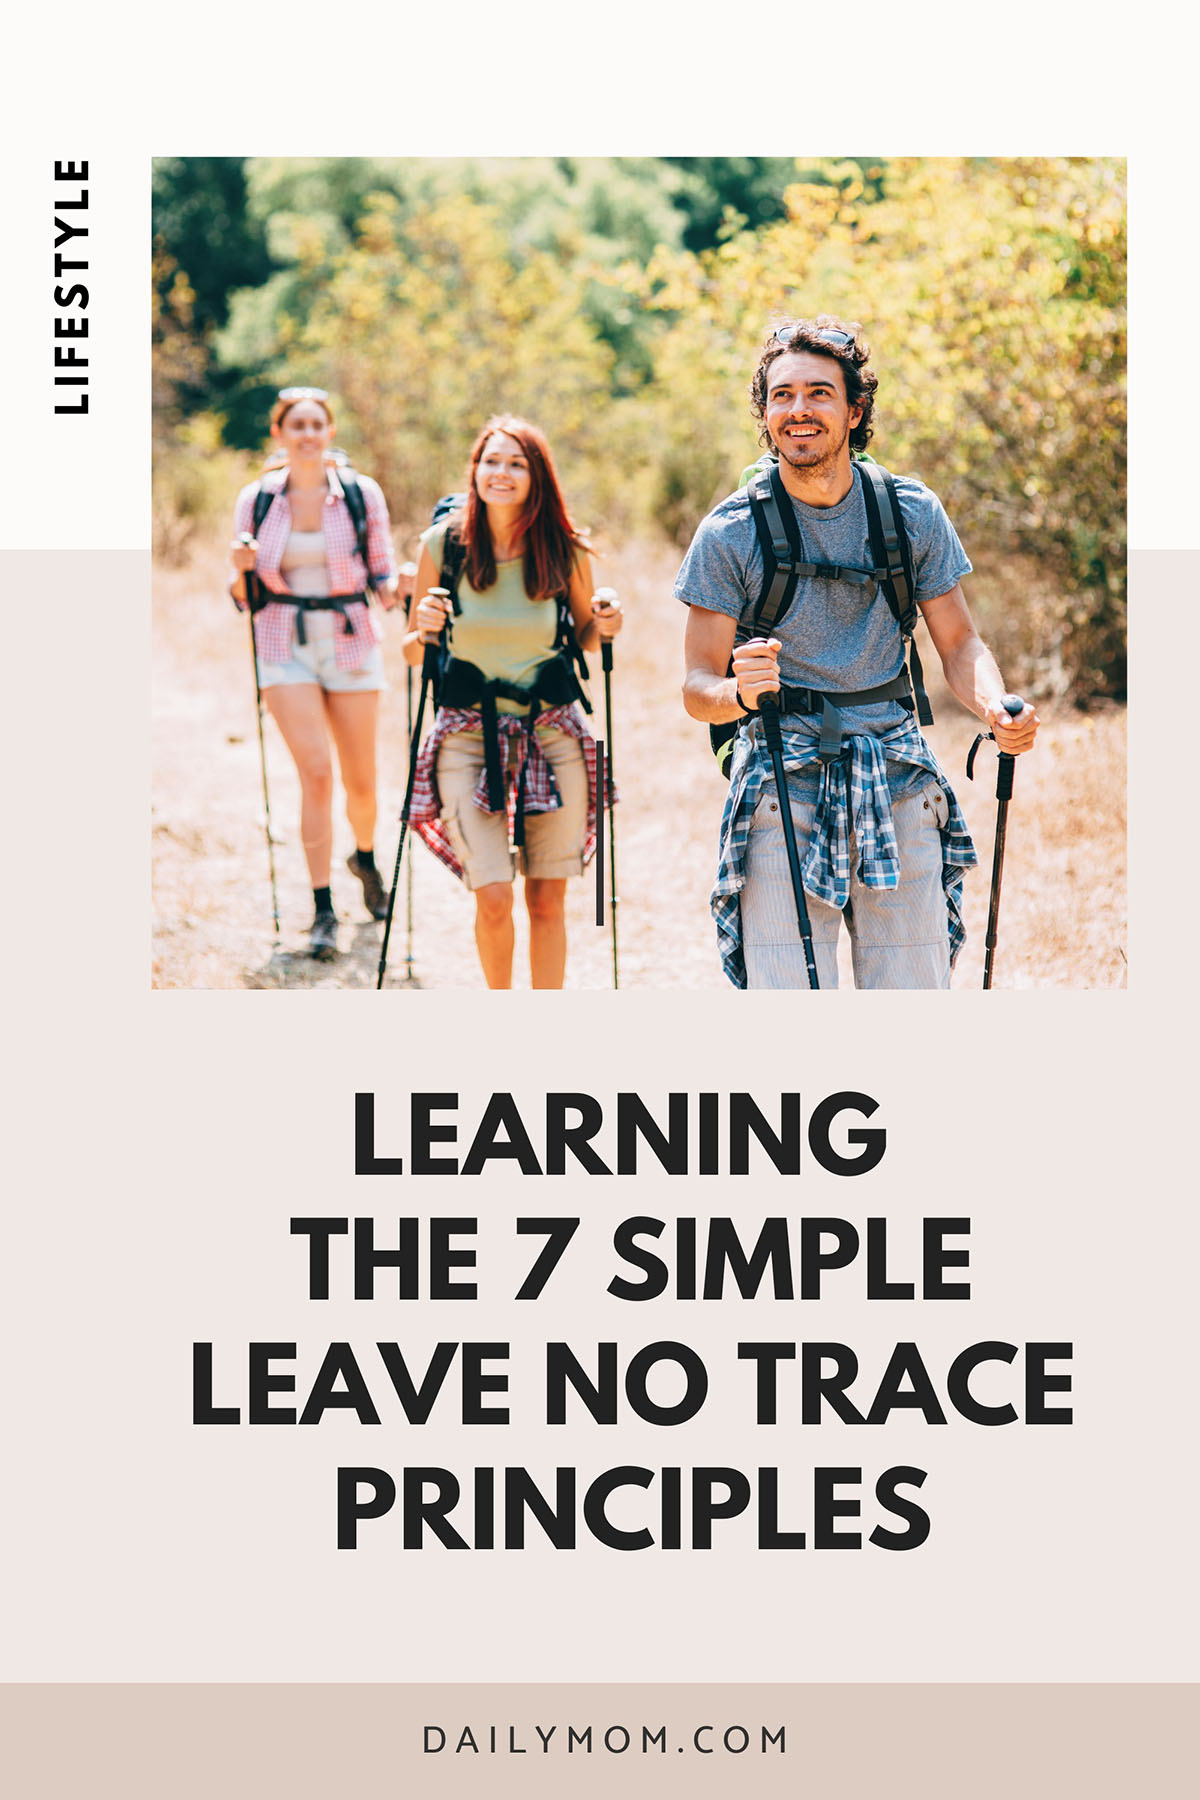 Daily-Mom-Parent-Portal-Principles-Of-Leave-No-Trace